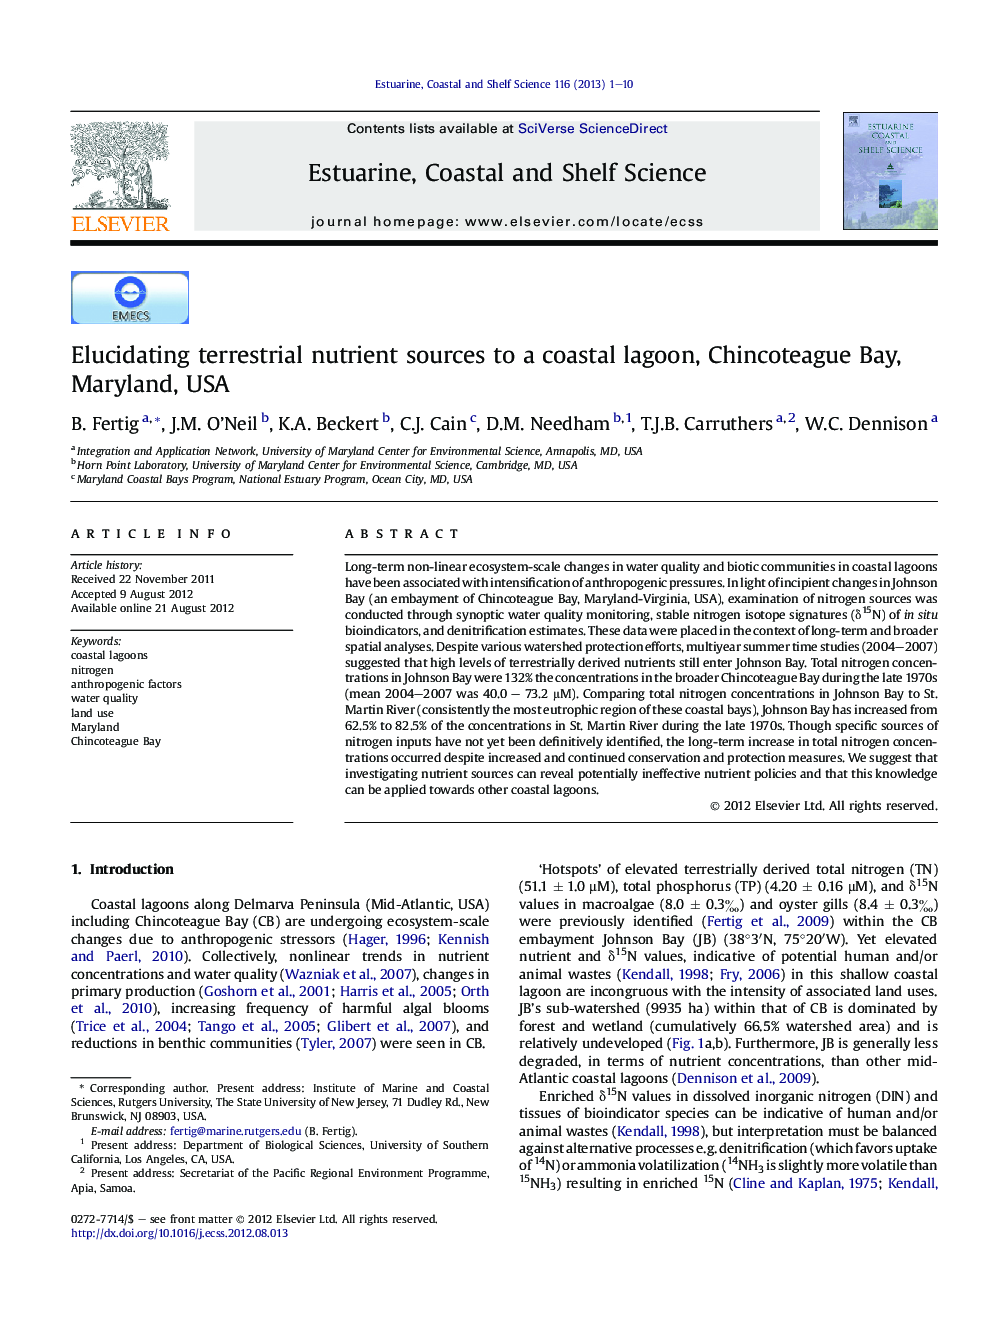 Elucidating terrestrial nutrient sources to a coastal lagoon, Chincoteague Bay, Maryland, USA